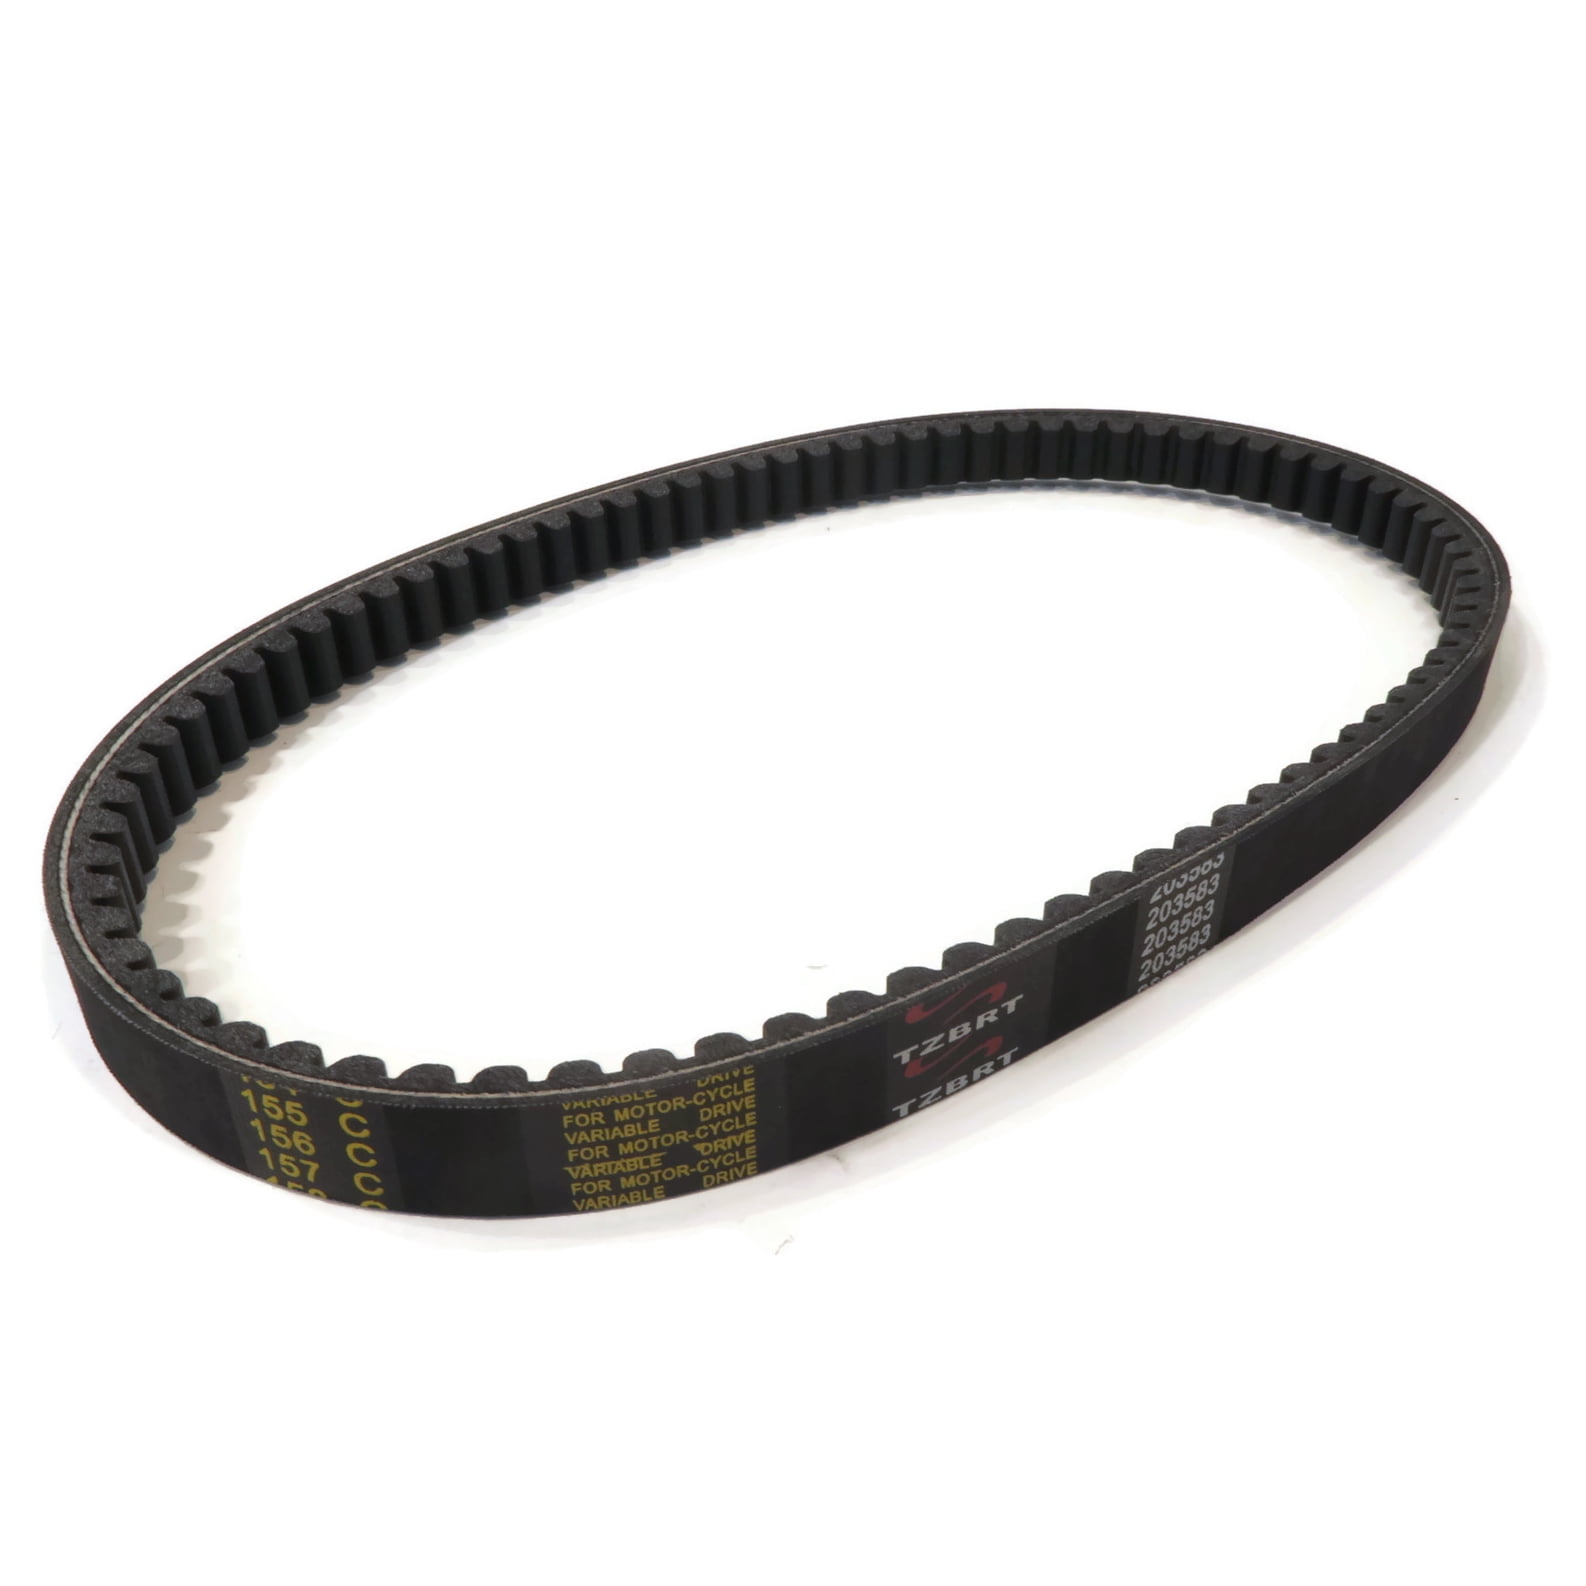 New For Go Kart Drive Belt 30 Series Replaces Manco 5959 Comet 203589 Blk FAST 